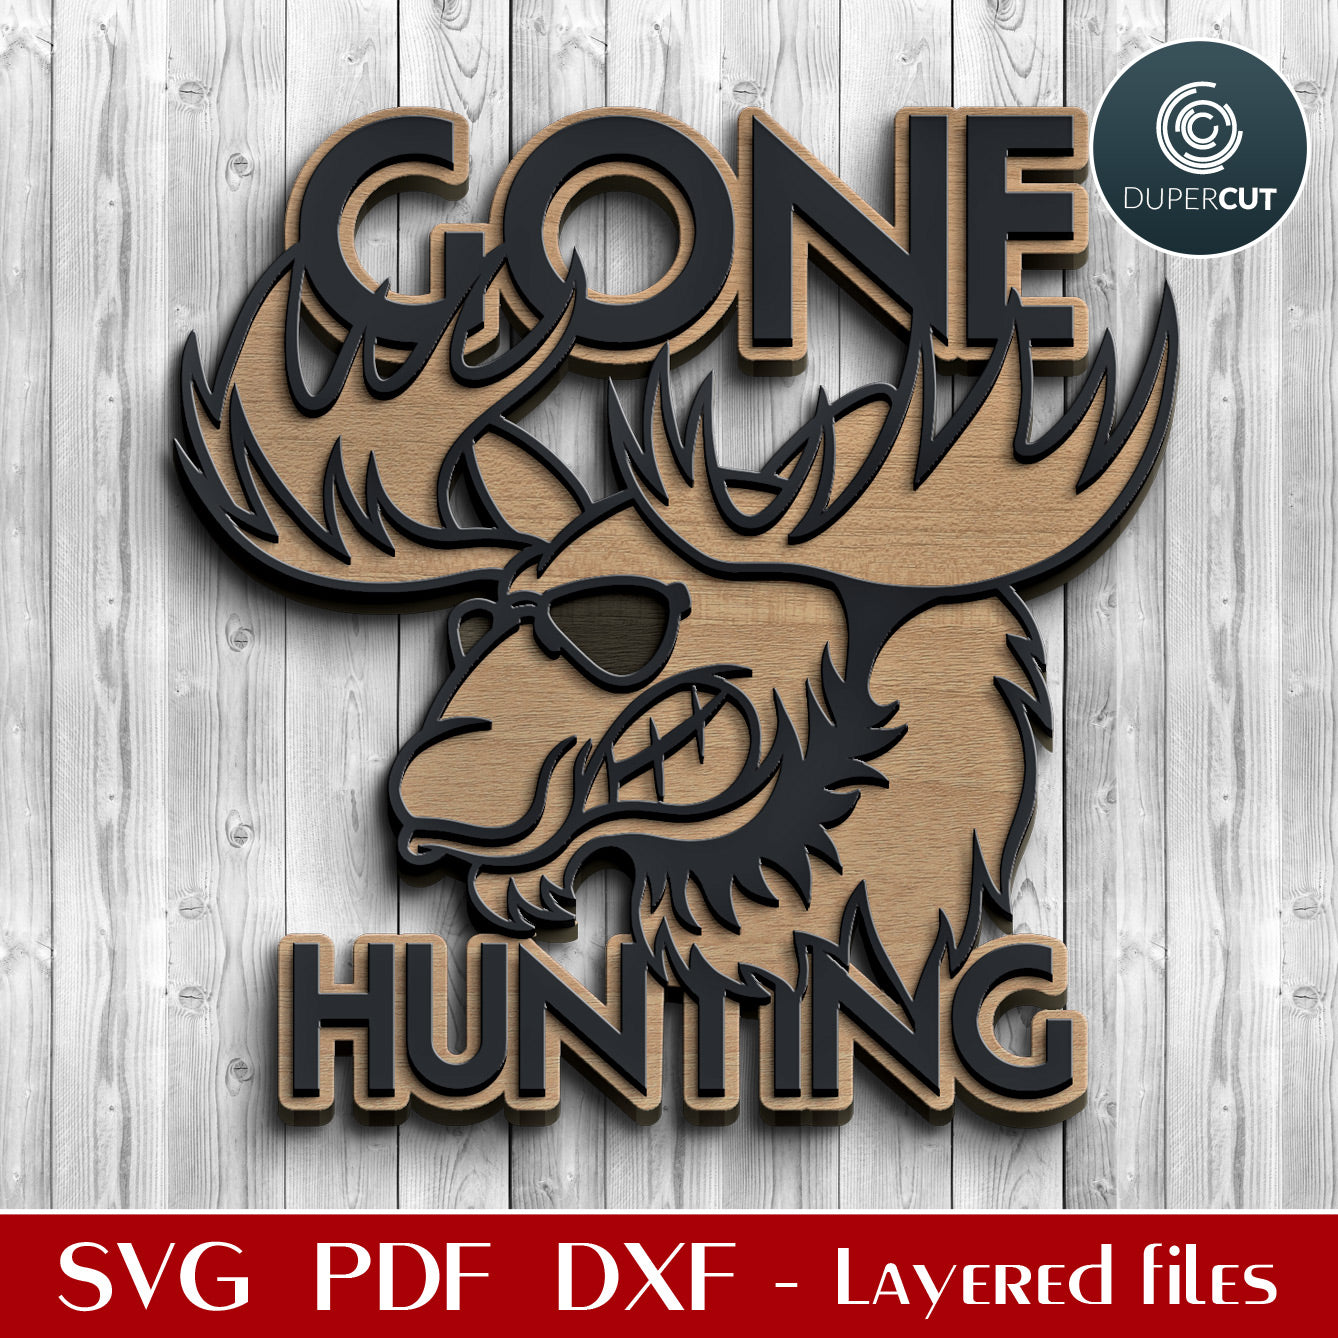 Gone Hunting funny sign - cool moose in sunglasses - SVG DXF vector files for laser cutting Glowforge, X-tool, Cricut, CNC plasma machines by www.DuperCut.com